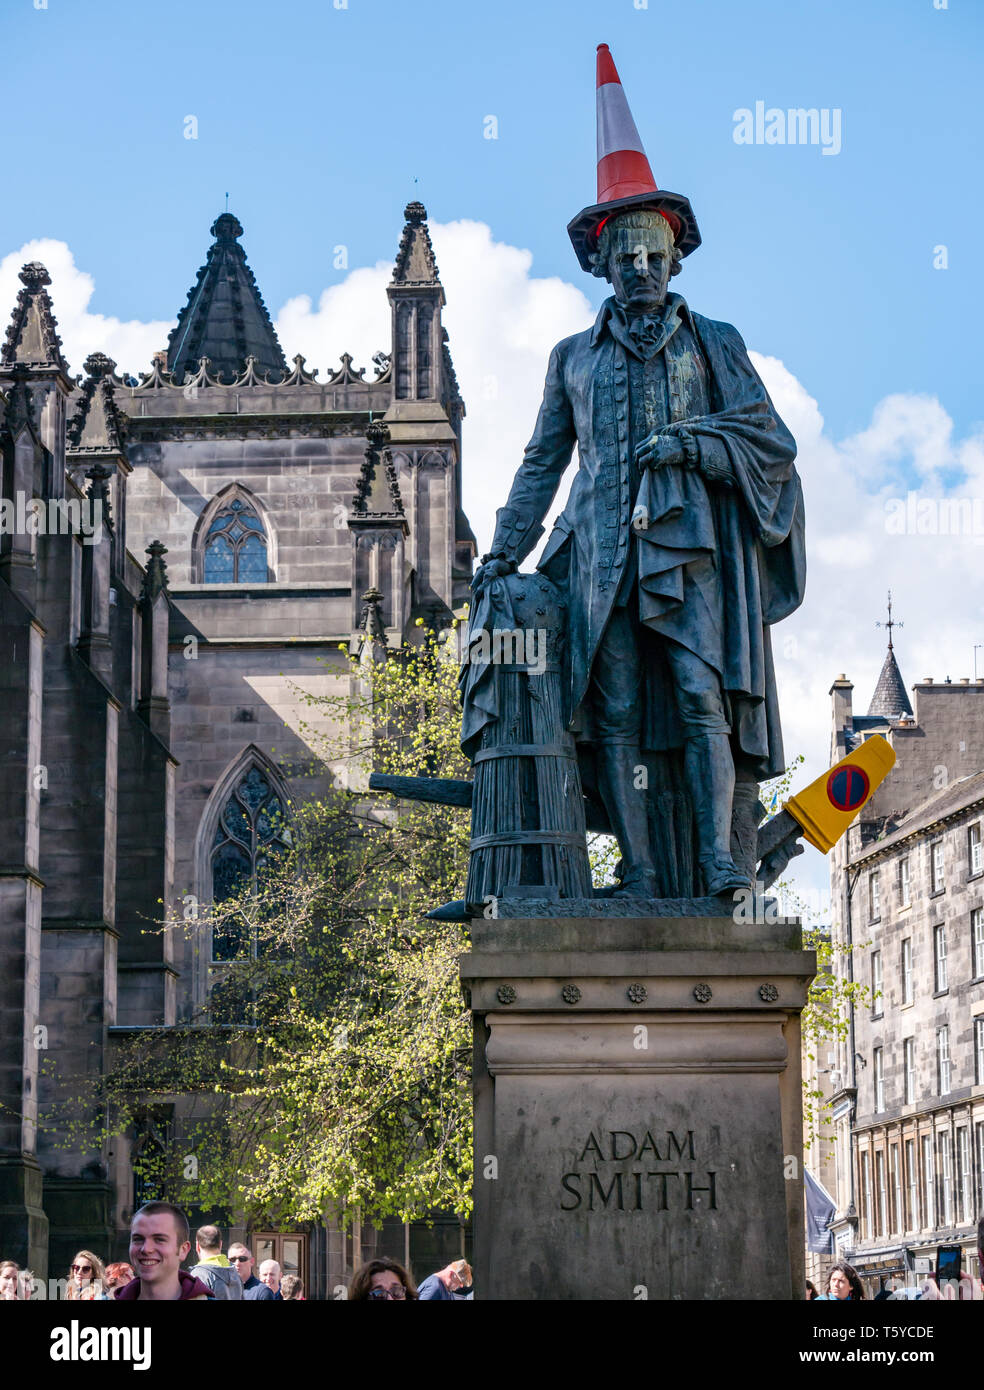 Royal Mile, Edinburgh, Scotland, United Kingdom, 27th April 2019.  Revellers decorate the Adam Smith statue with traffic cones in the Spring sunshine as he looks down on the tourists passing by Stock Photo